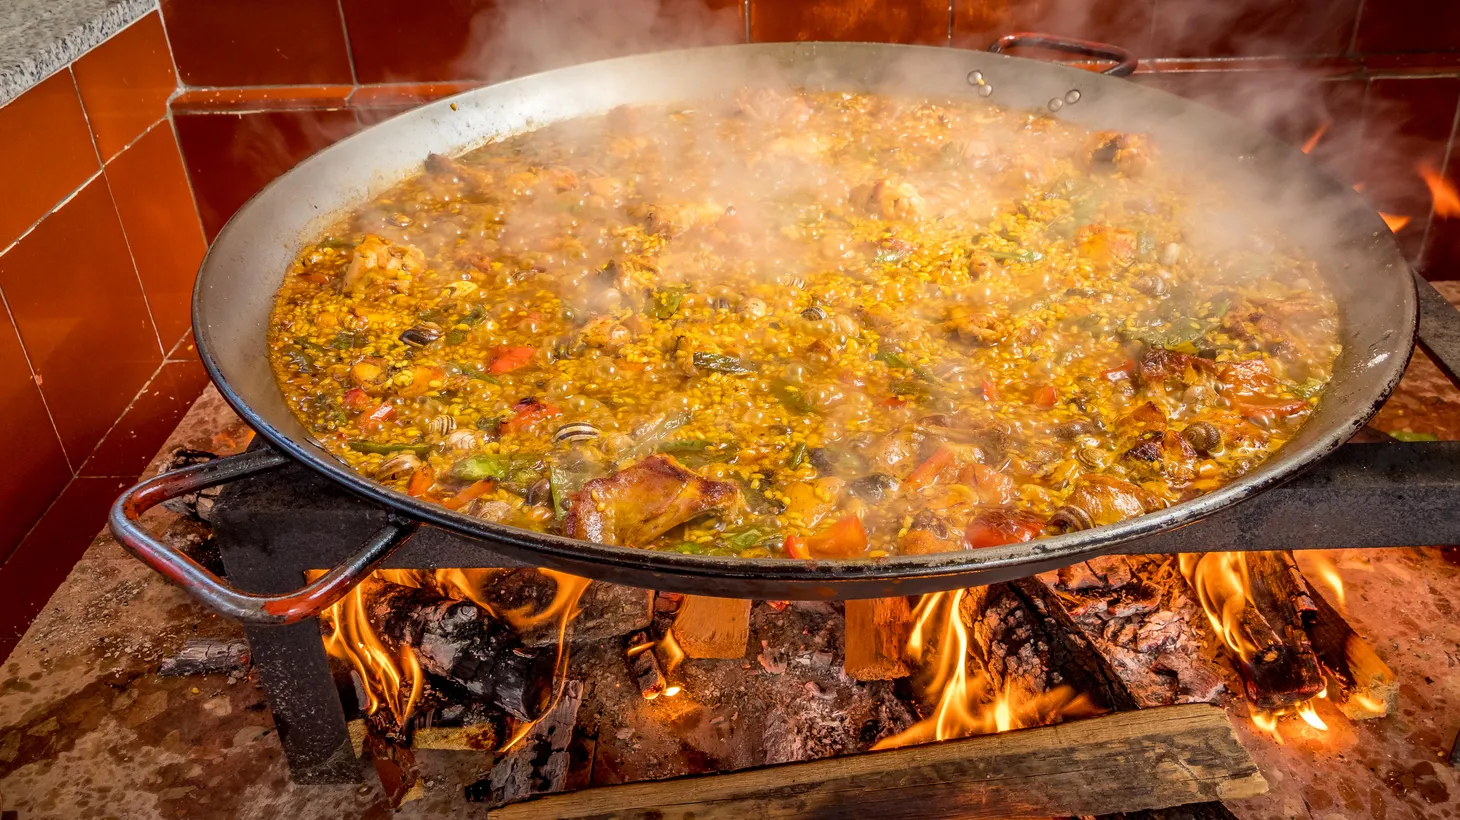 Paella — also called “rice with the stuff” — is ideal for entertaining